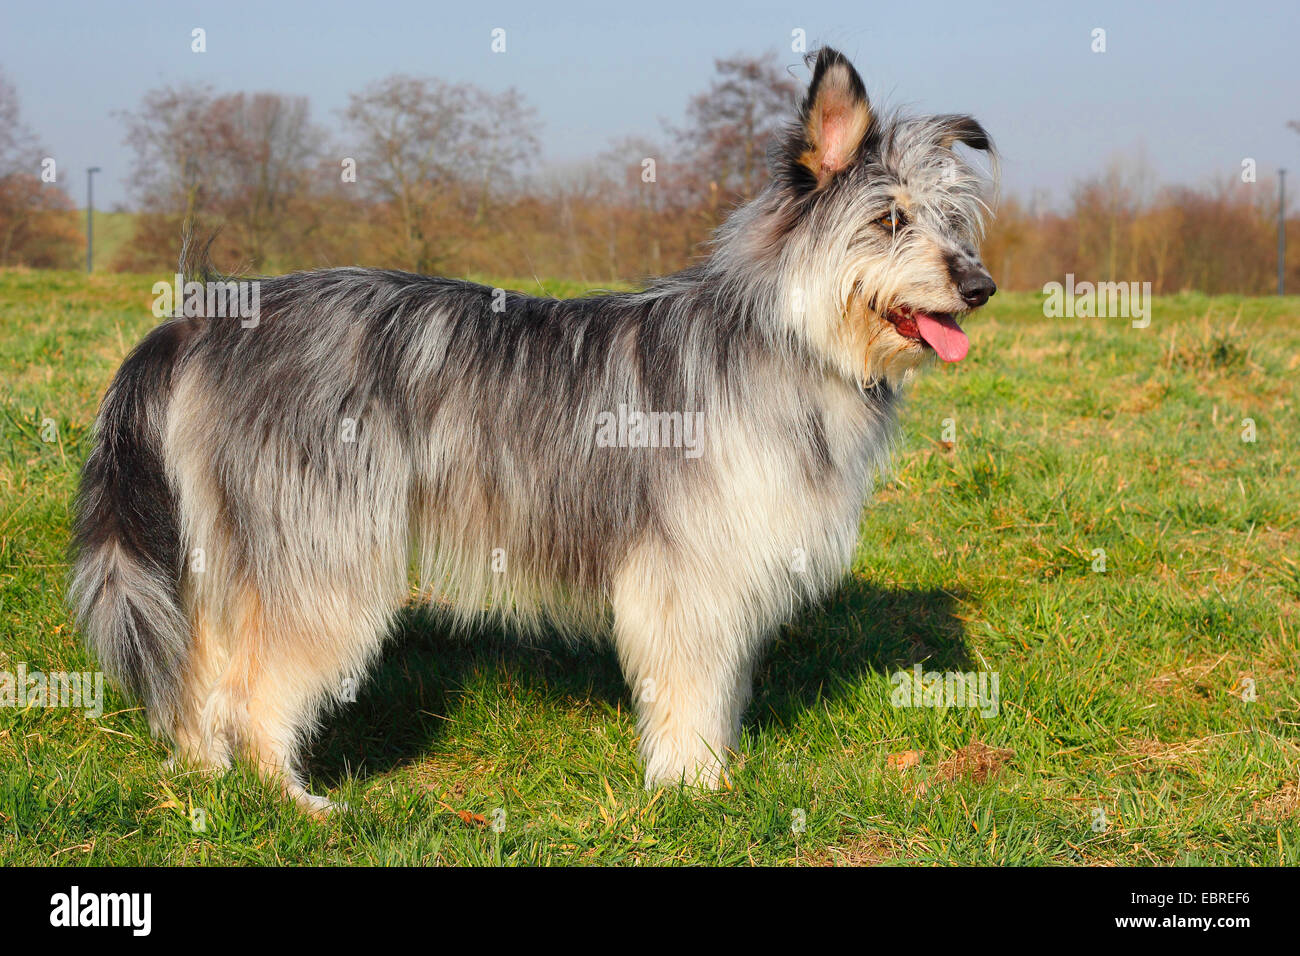 Berger de Picardie, Berger Picard (Canis lupus f. familiaris), three year old mixed breed stands in a meadow, Germany Stock Photo